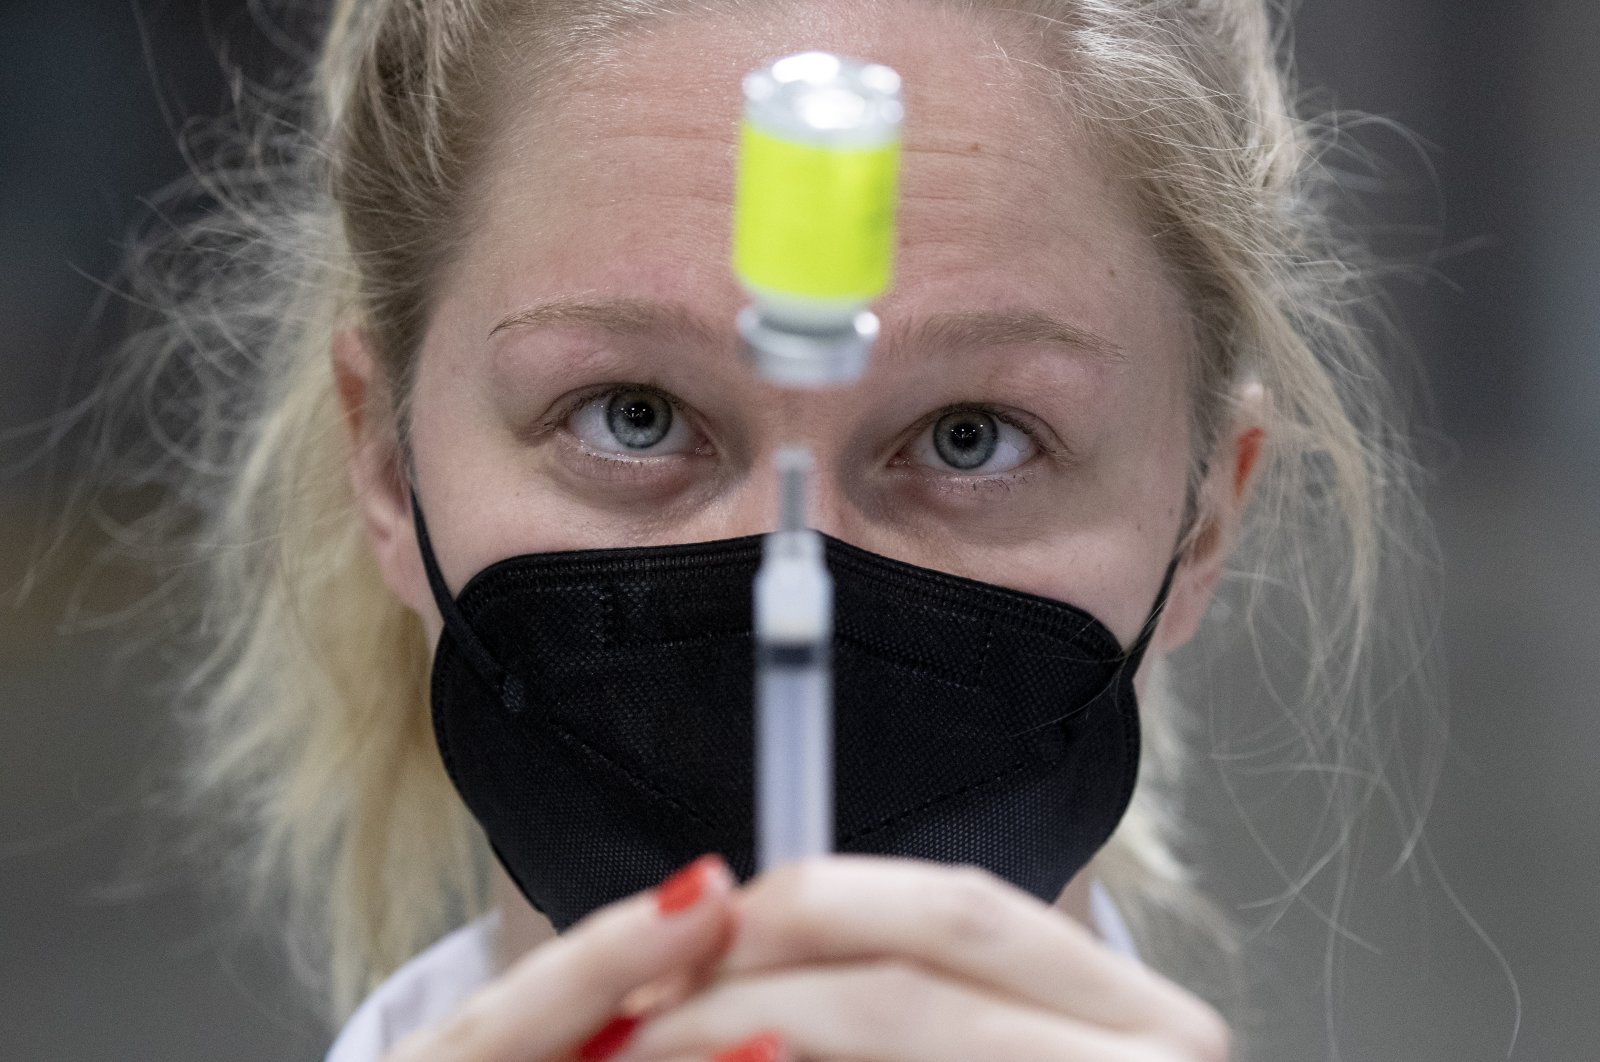 A medical professional prepares a syringe with a dose of the Moderna COVID-19 vaccine at a mass vaccination event hosted by Unity Health Care, at the Walter E. Washington Convention Center in Washington, D.C., the U.S., April 3, 2021. (EPA Photo)